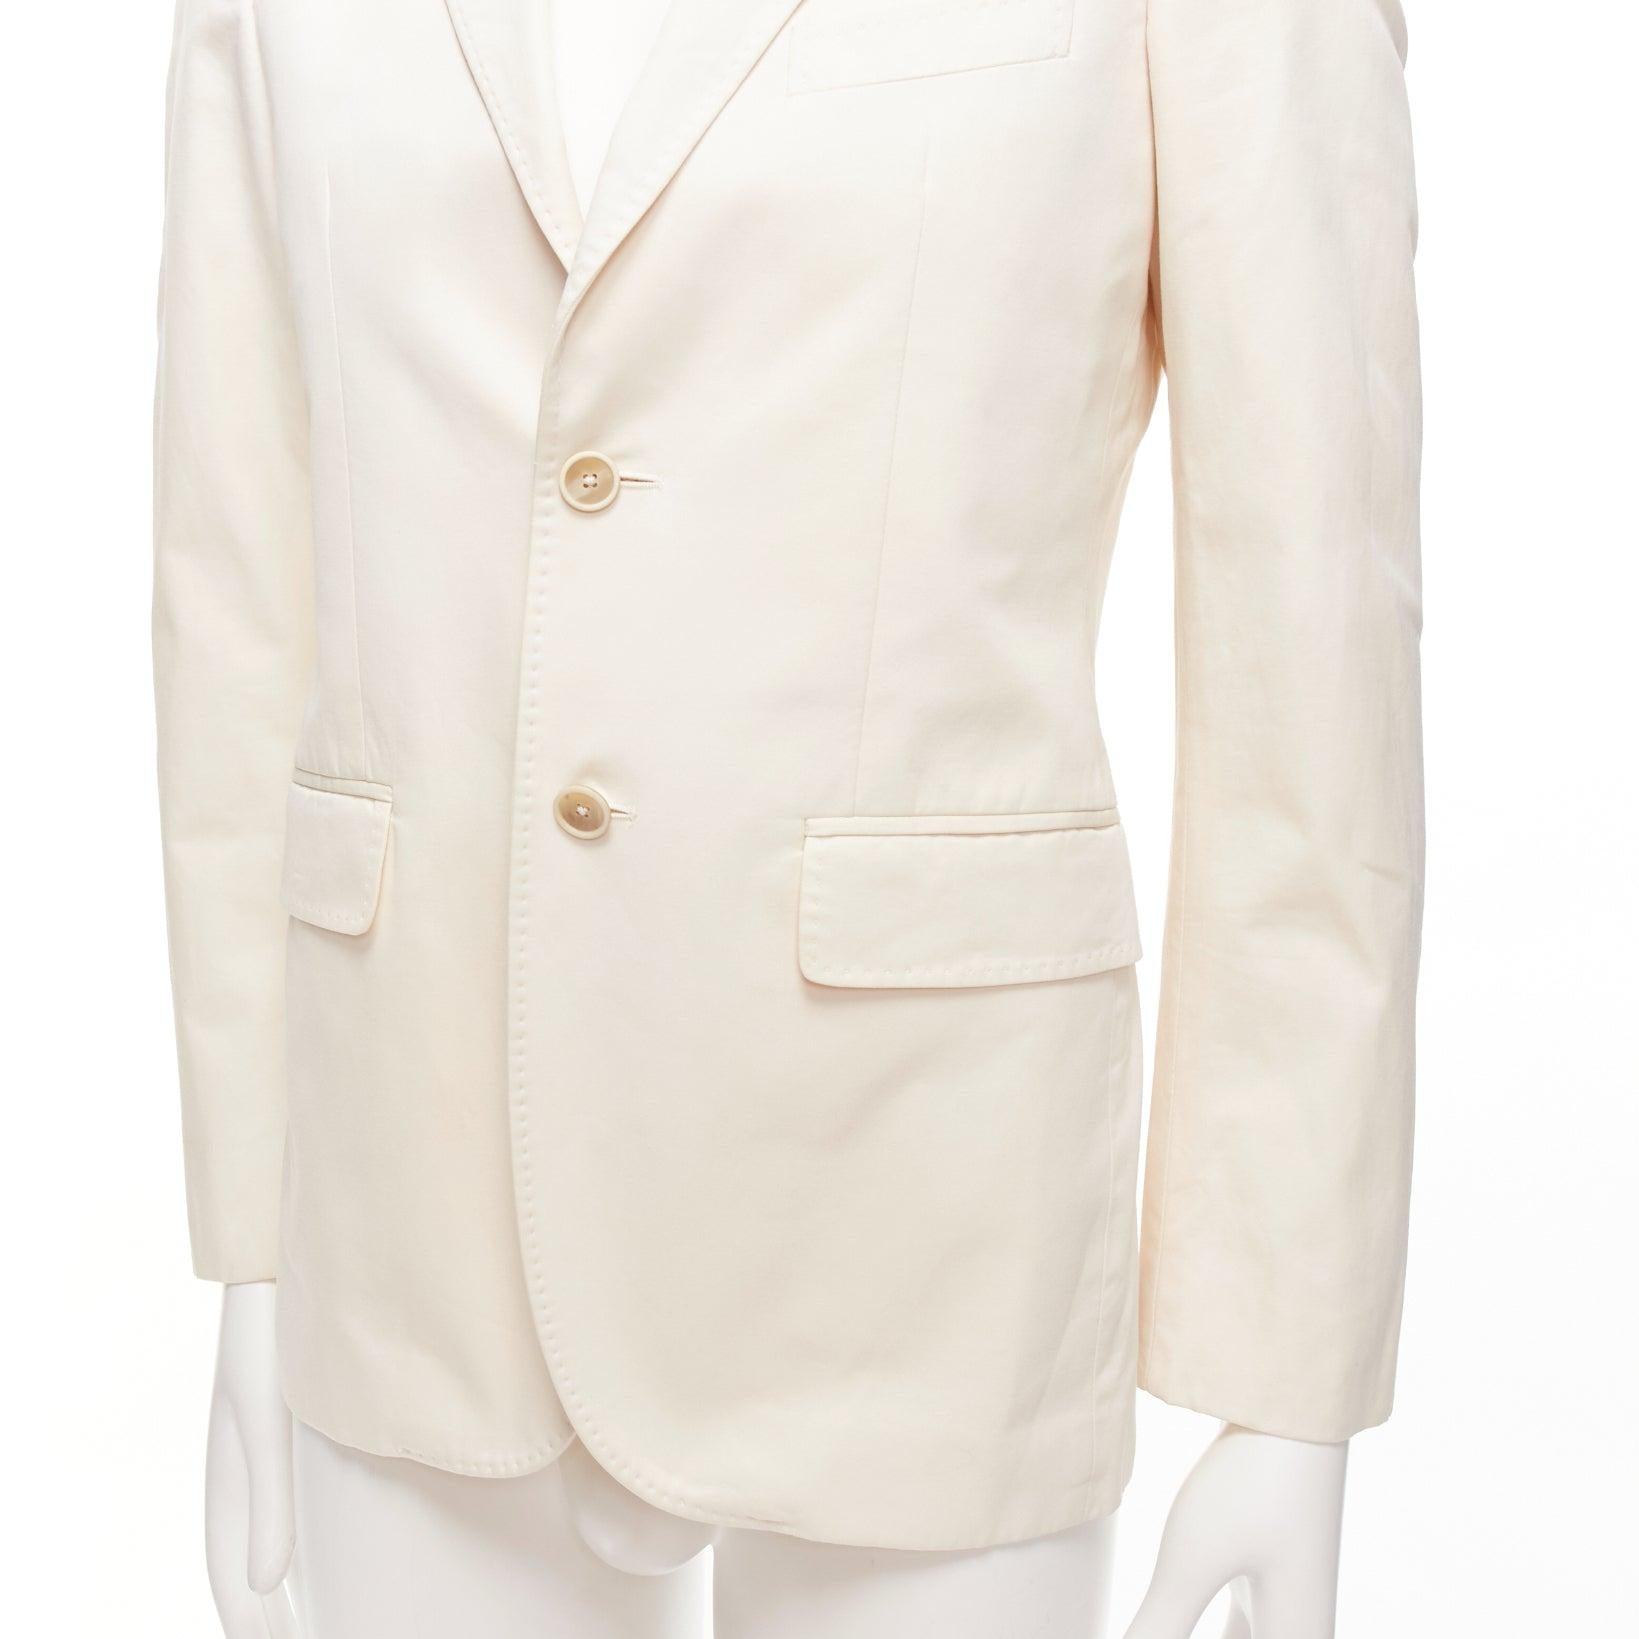 JIL SANDER cream cotton hand stitched lapel pocket single vent blazer IT46 S
Reference: MLCO/A00014
Brand: Jil Sander
Material: Cotton
Color: Cream
Pattern: Solid
Closure: Button
Lining: Cream Fabric
Extra Details: Single vent.
Made in: